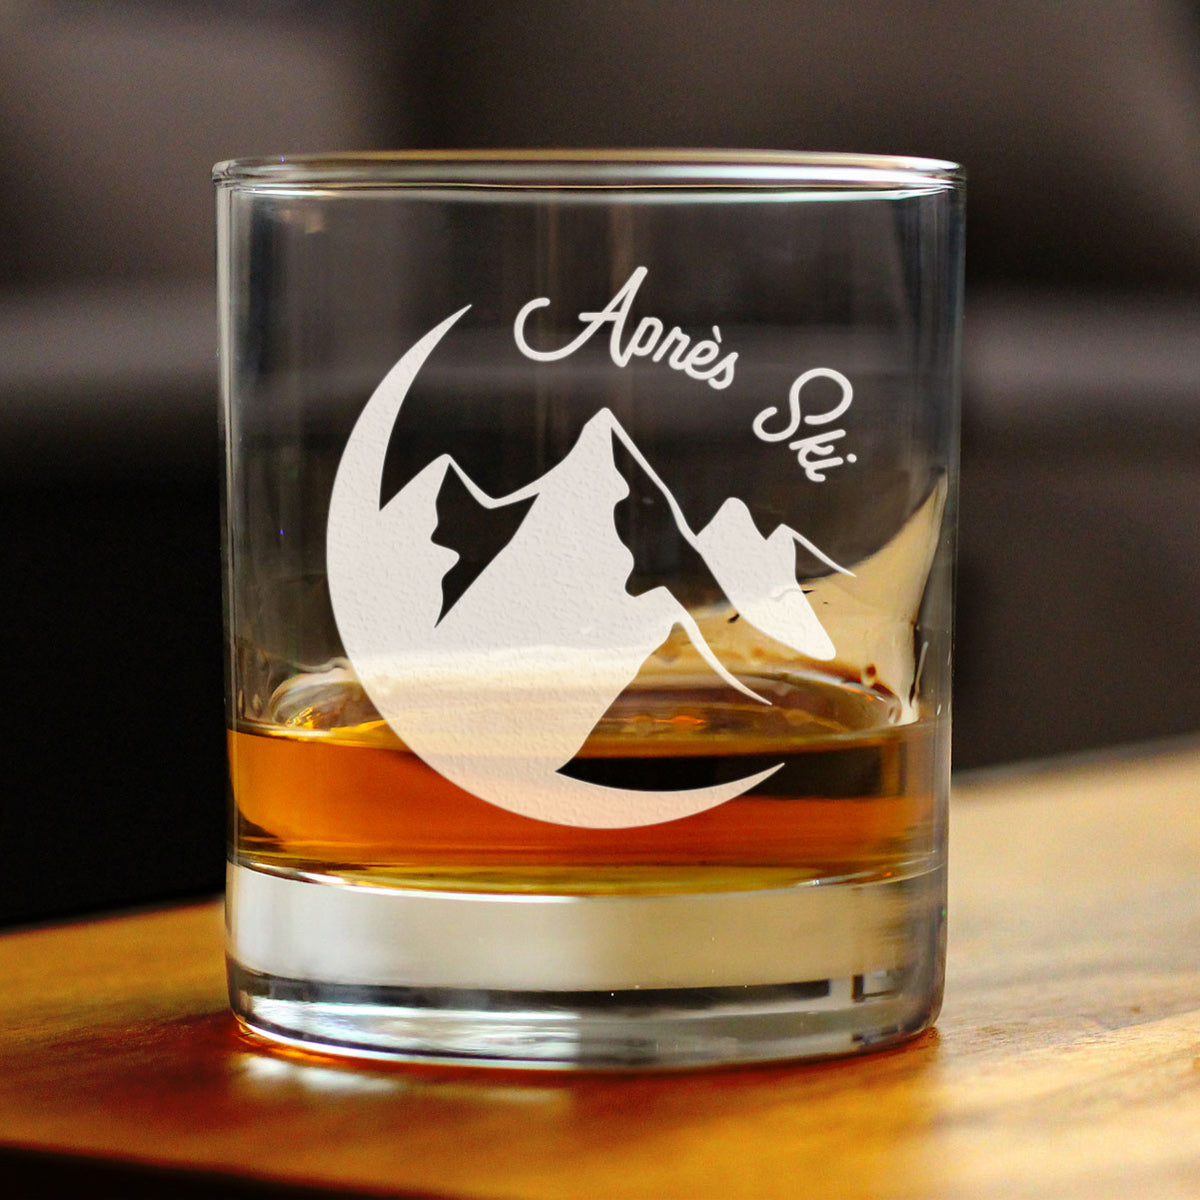 Apres Ski - Whiskey Rocks Glass - Unique Skiing Themed Decor and Gifts for Mountain Lovers - 10.25 Oz Glasses